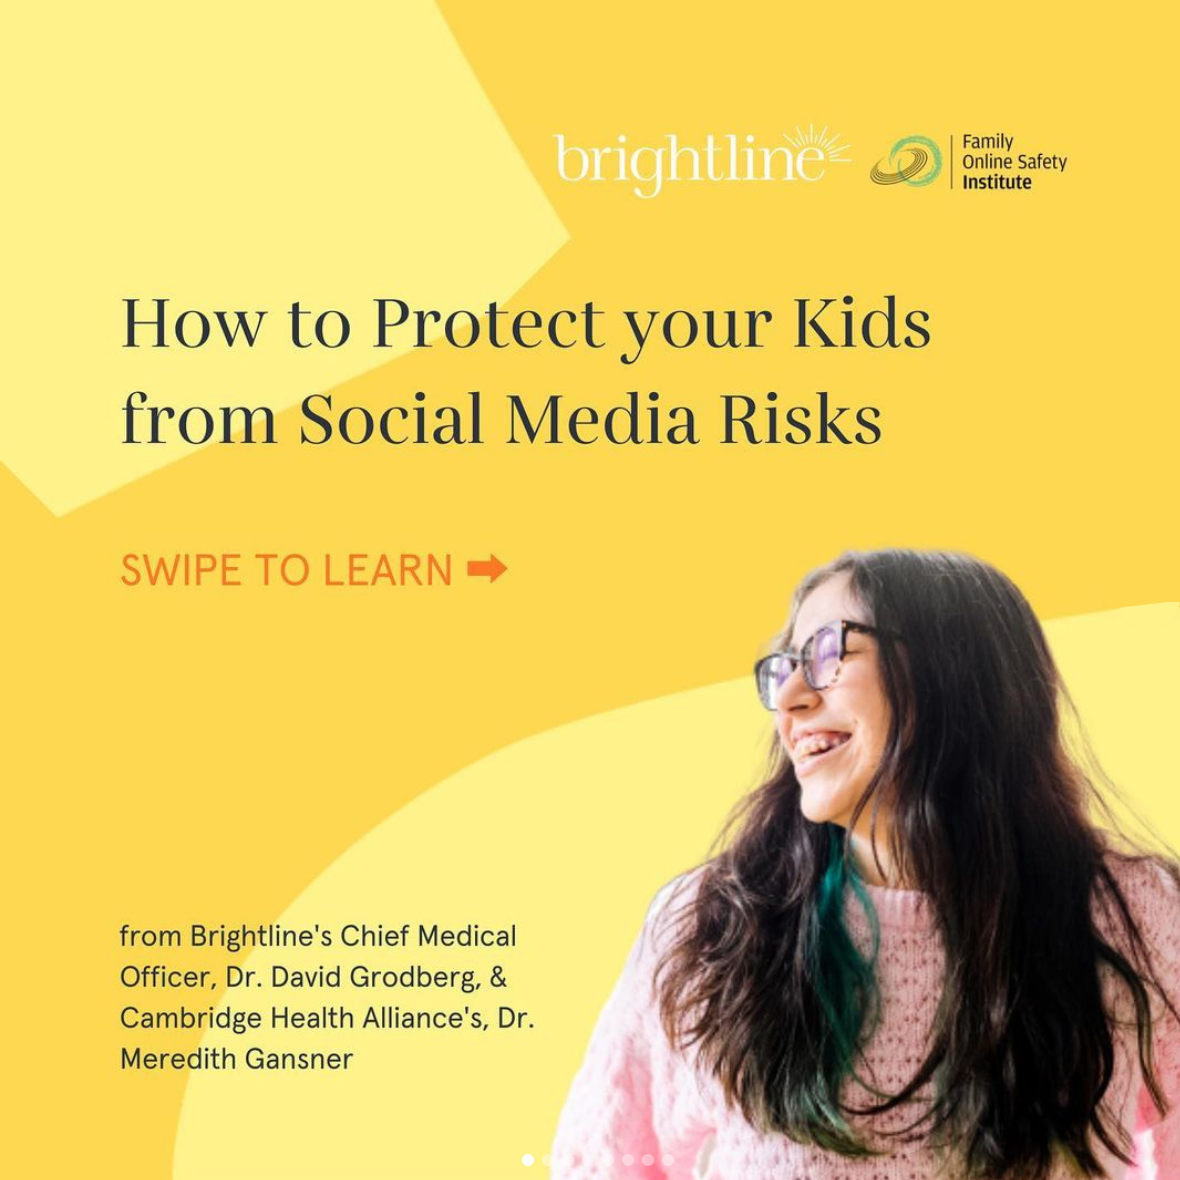 A graphical post detailing a guide from Brightline's CMO, Dr. David Grodberg, "How to Protect your Kids from Social Media Risks."